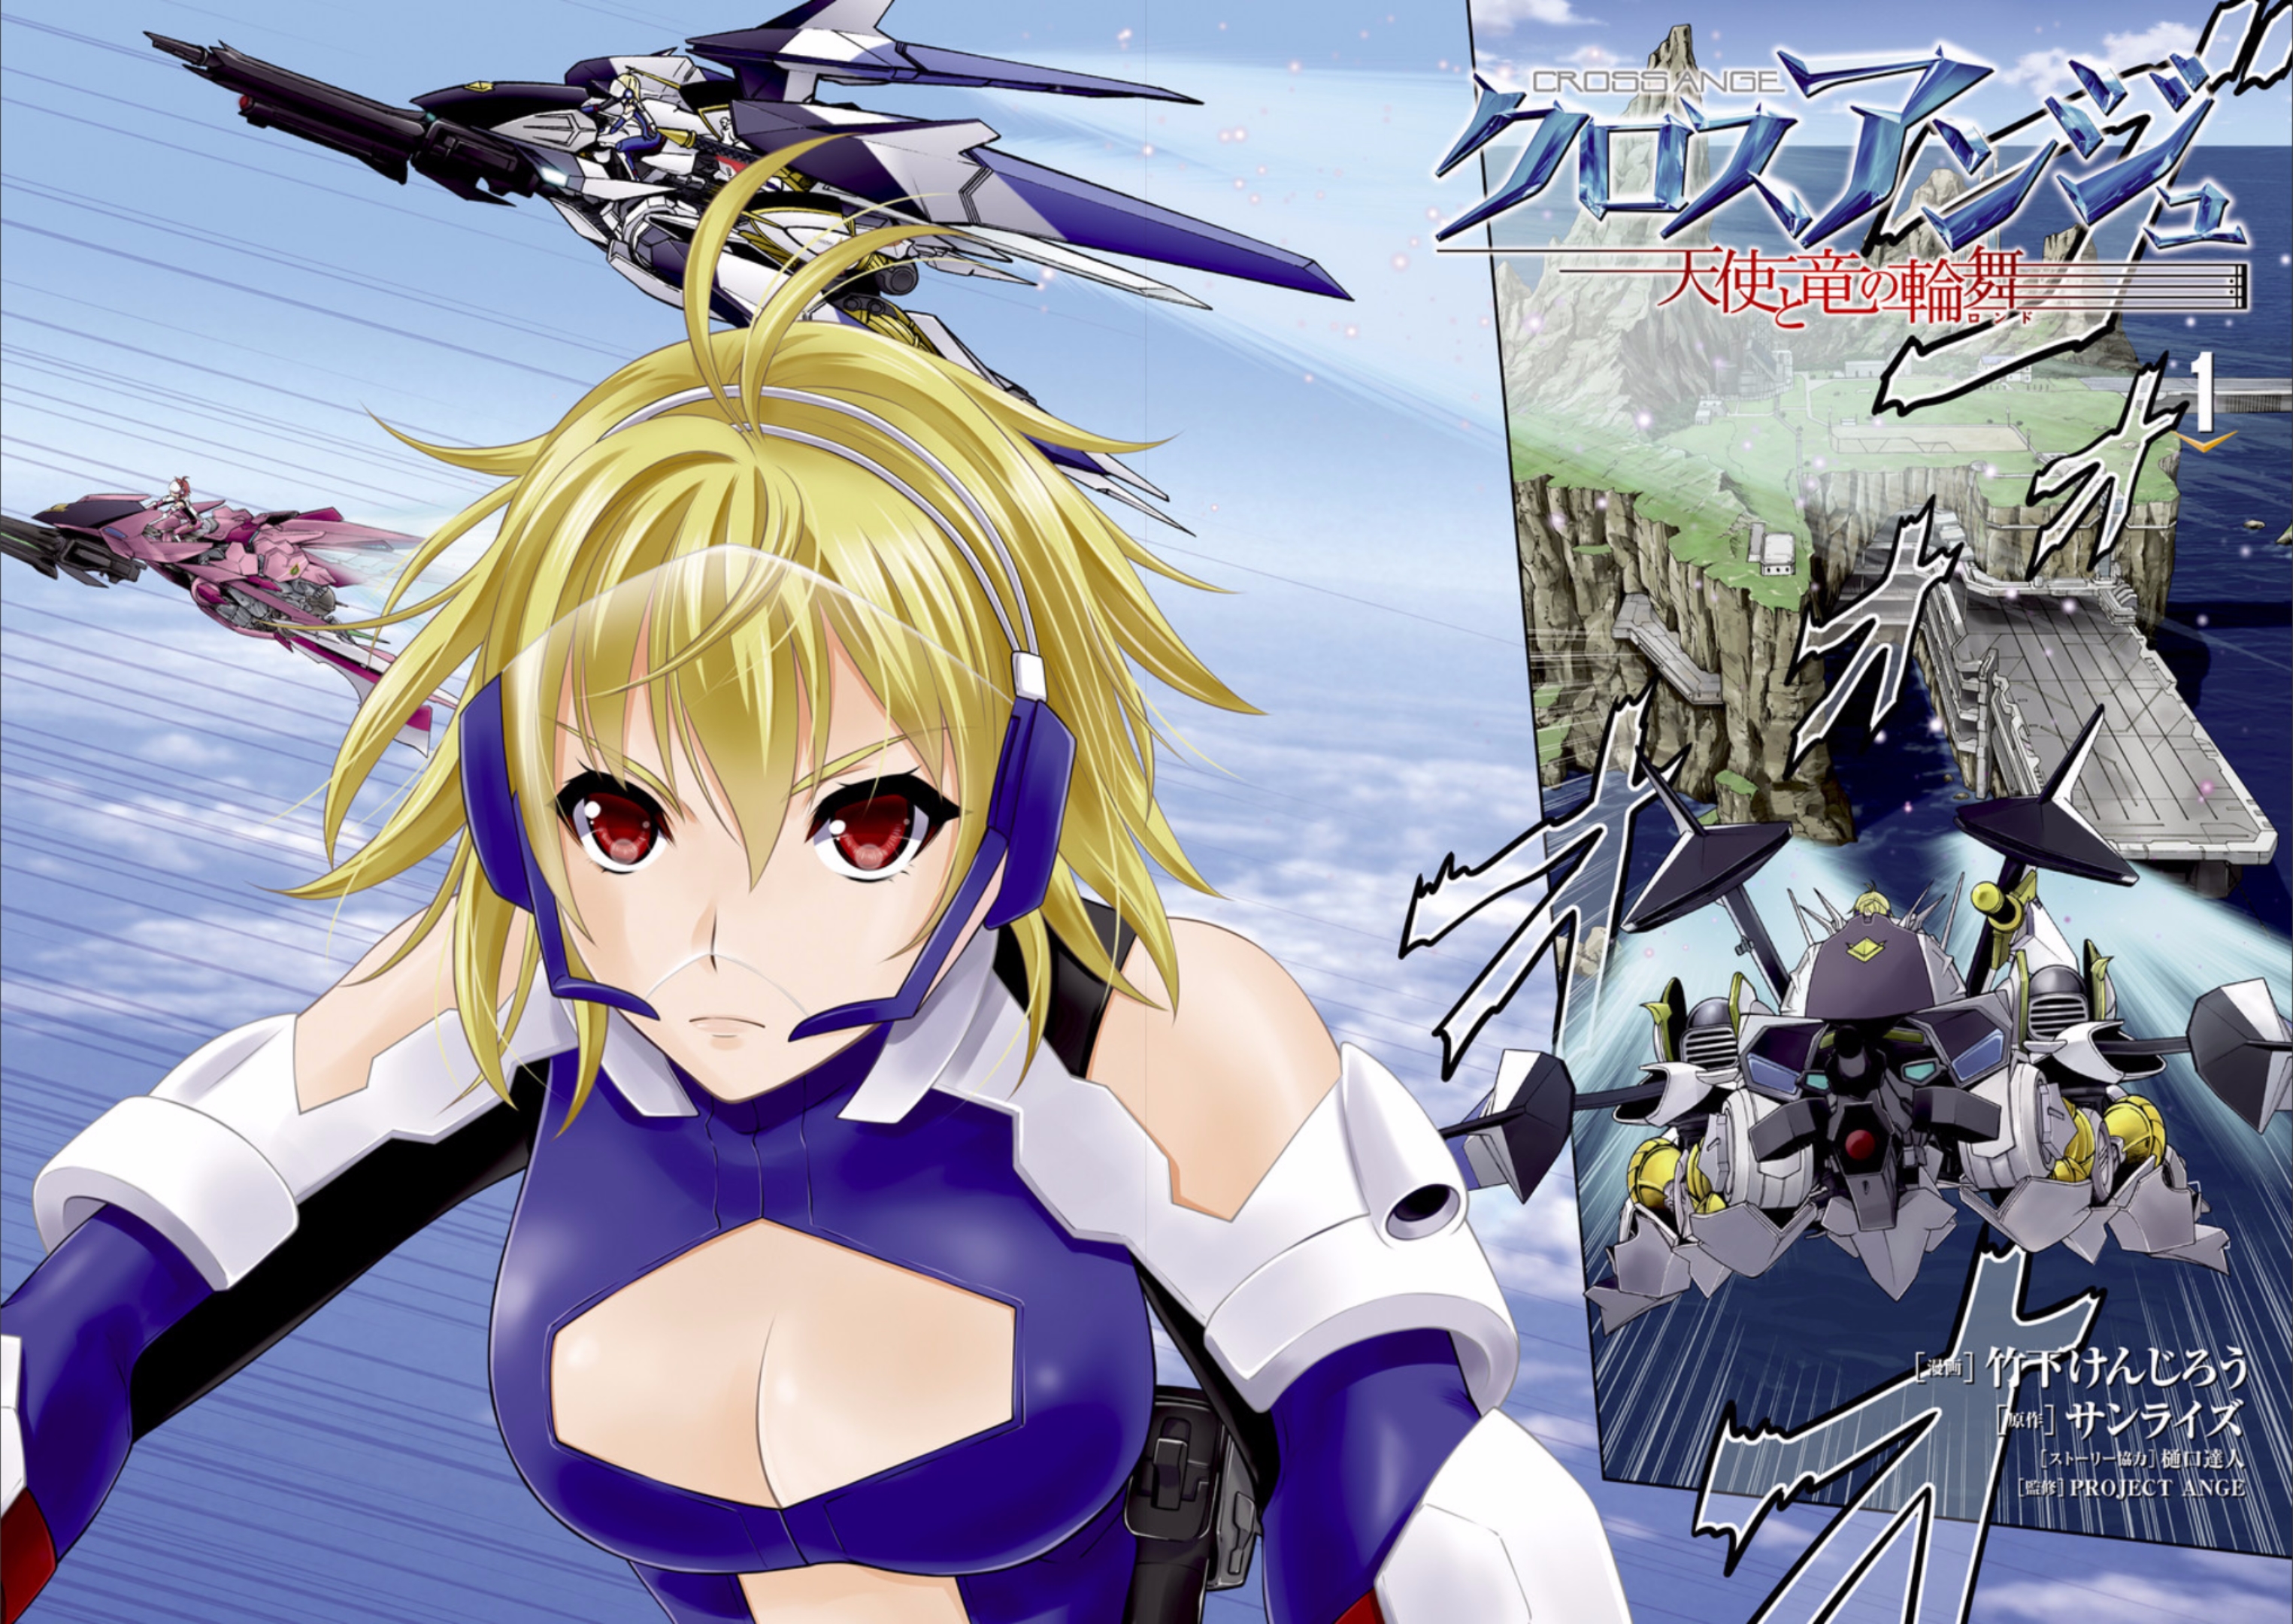 Cross Ange: Academy of Angels and Dragons - MangaDex